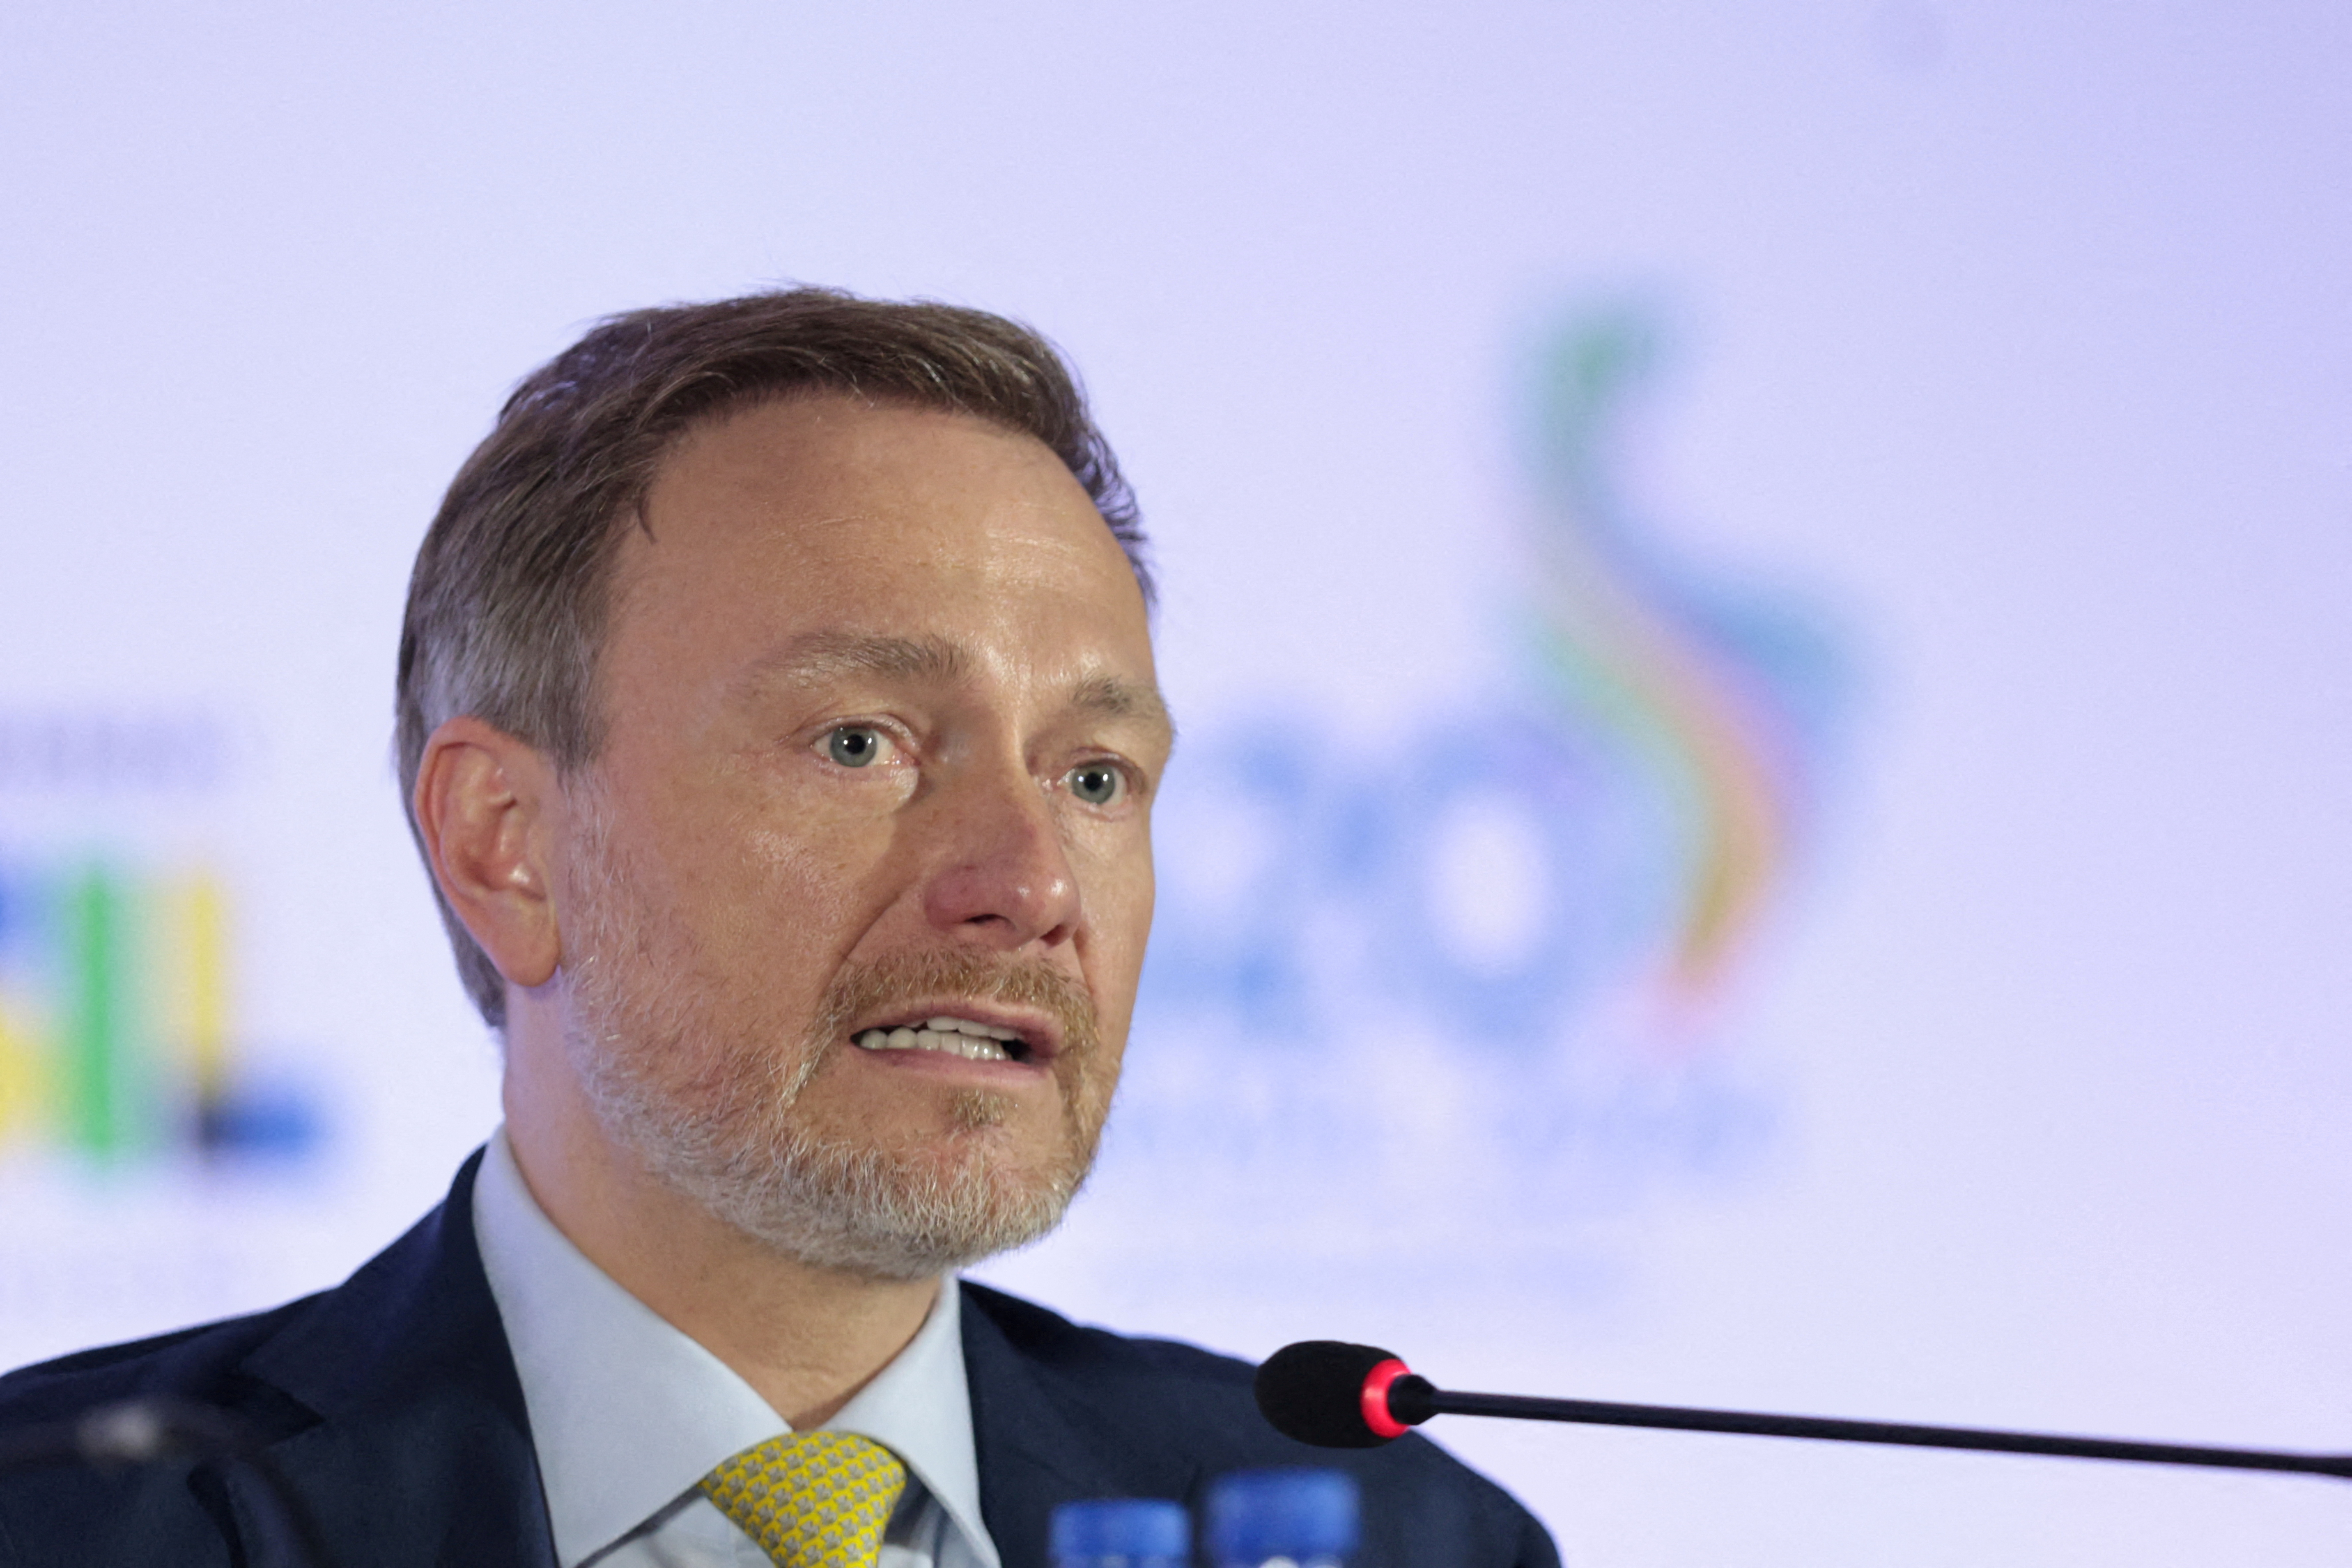 Germany's Lindner at a press conference in Brazil